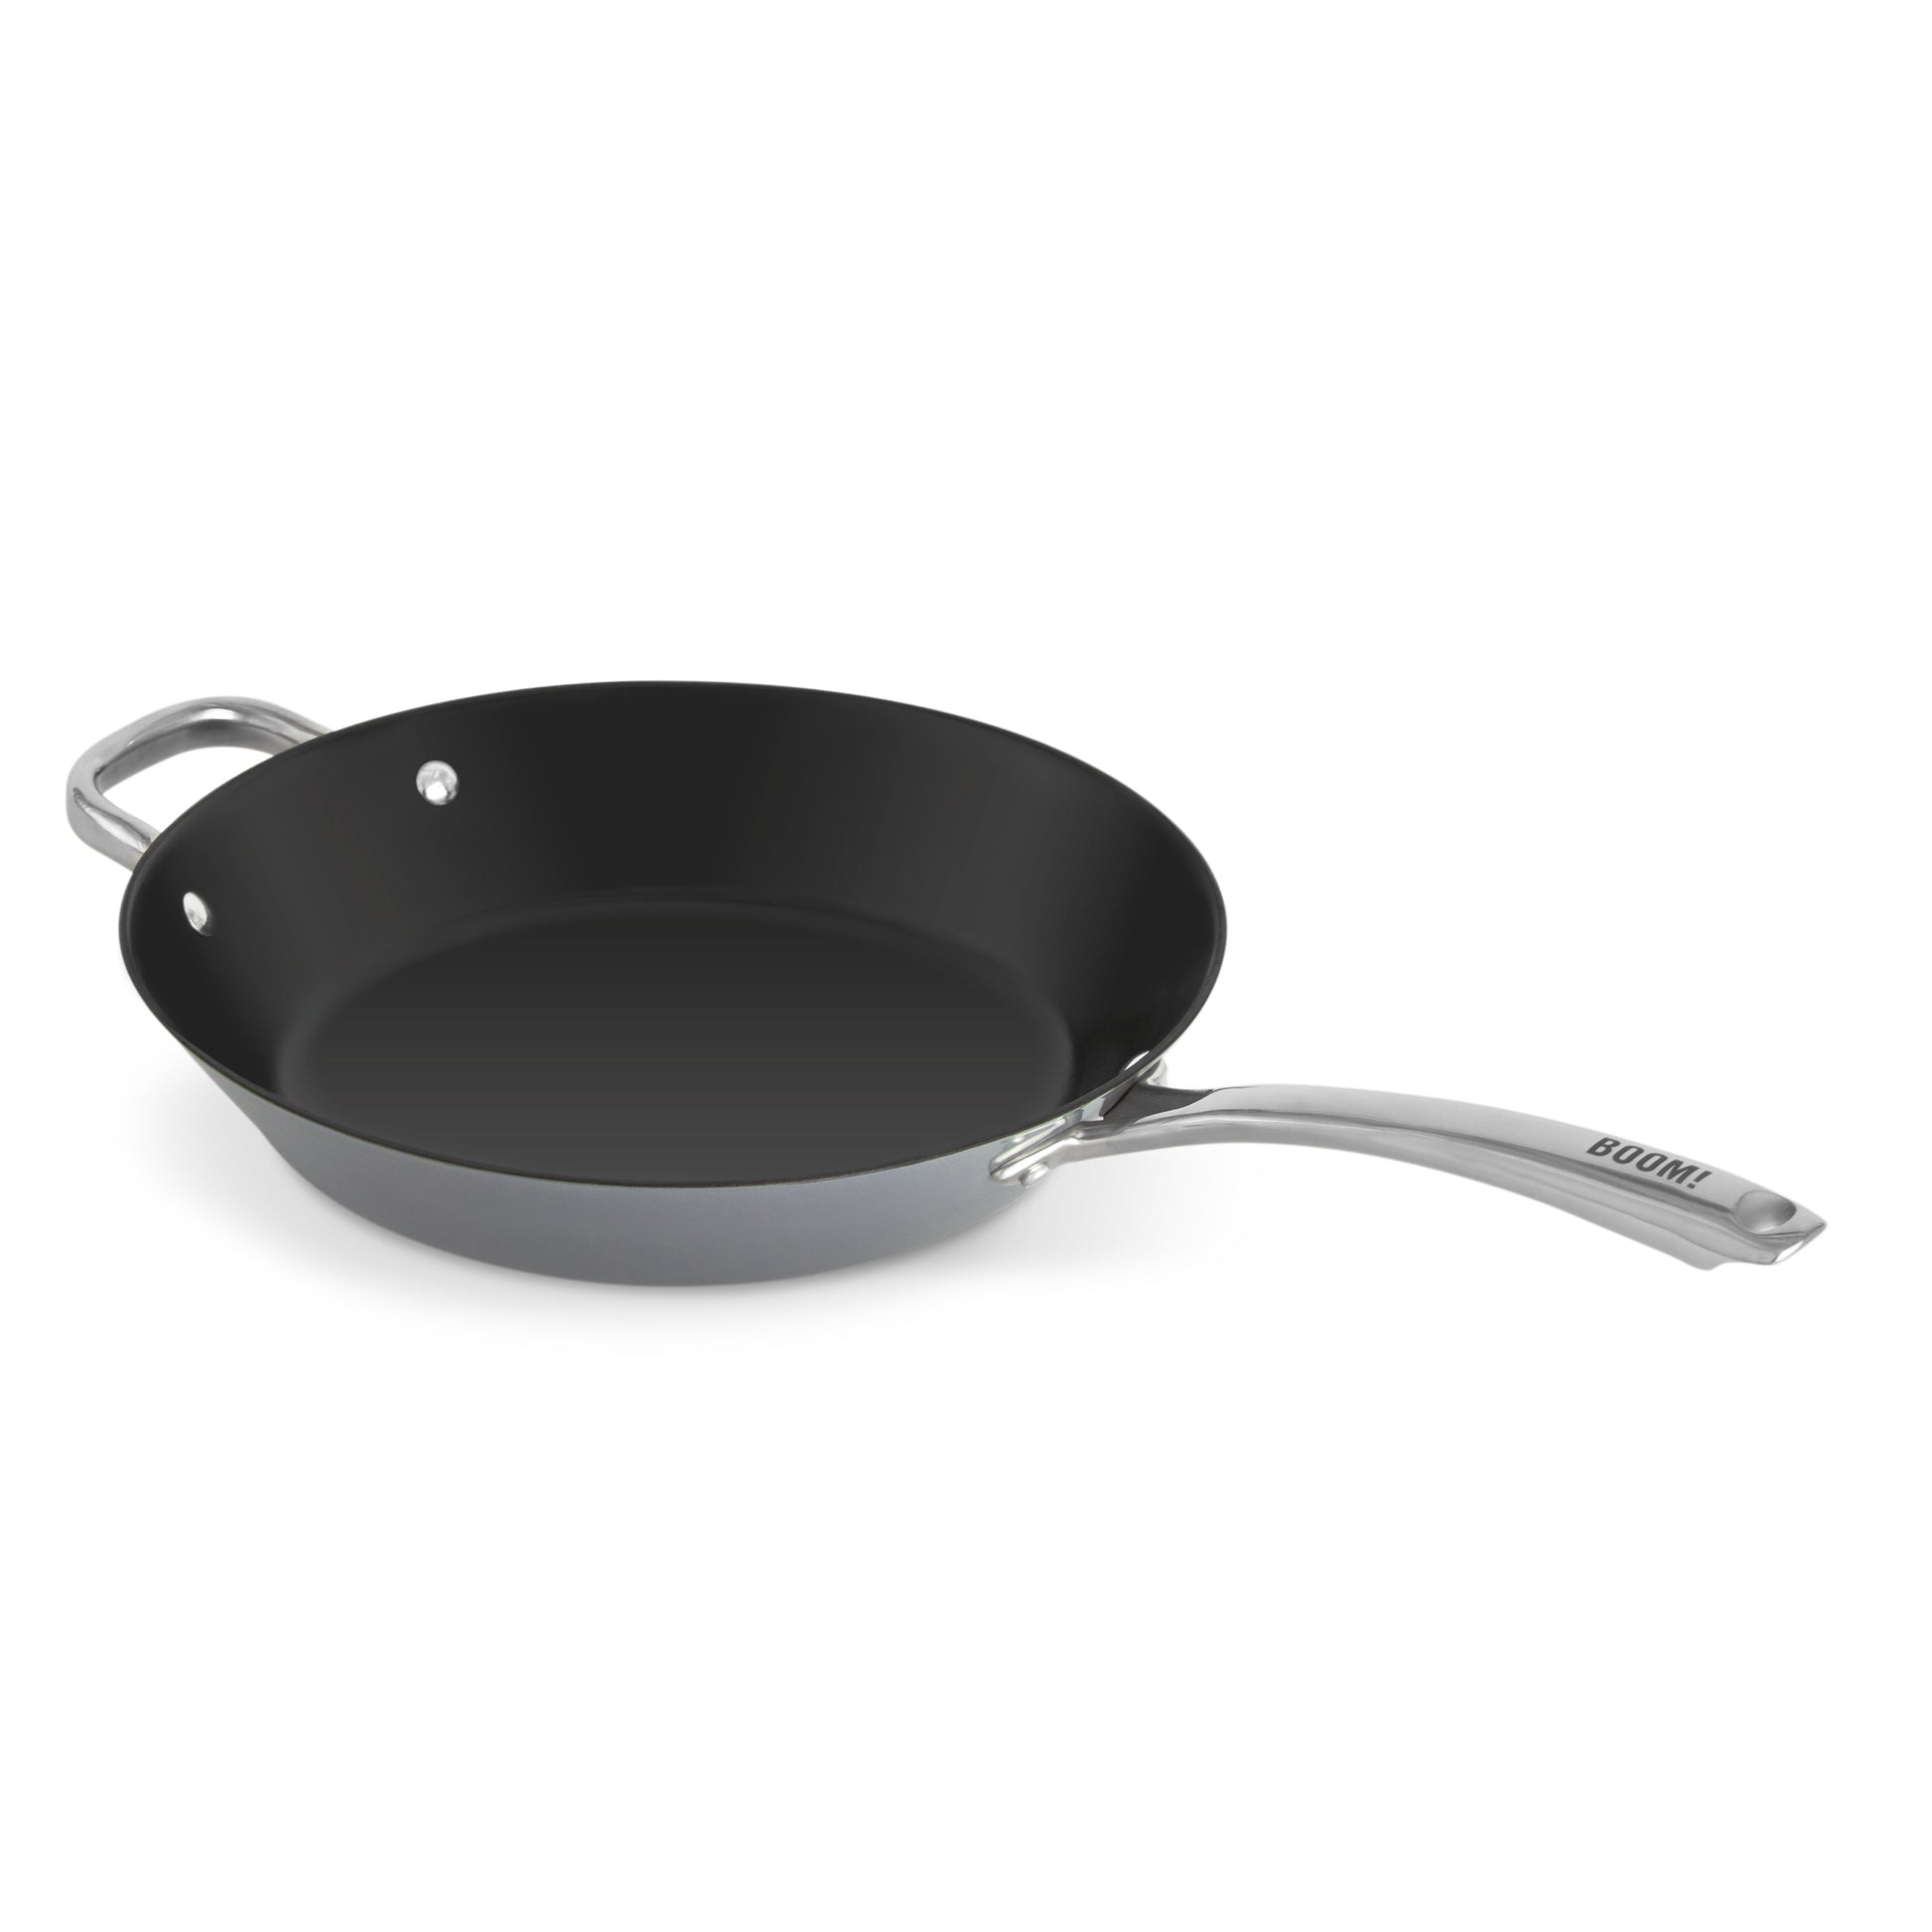 Carbon Steel Fry Pan cookware The Fit Cook x Dash Slate 12" 